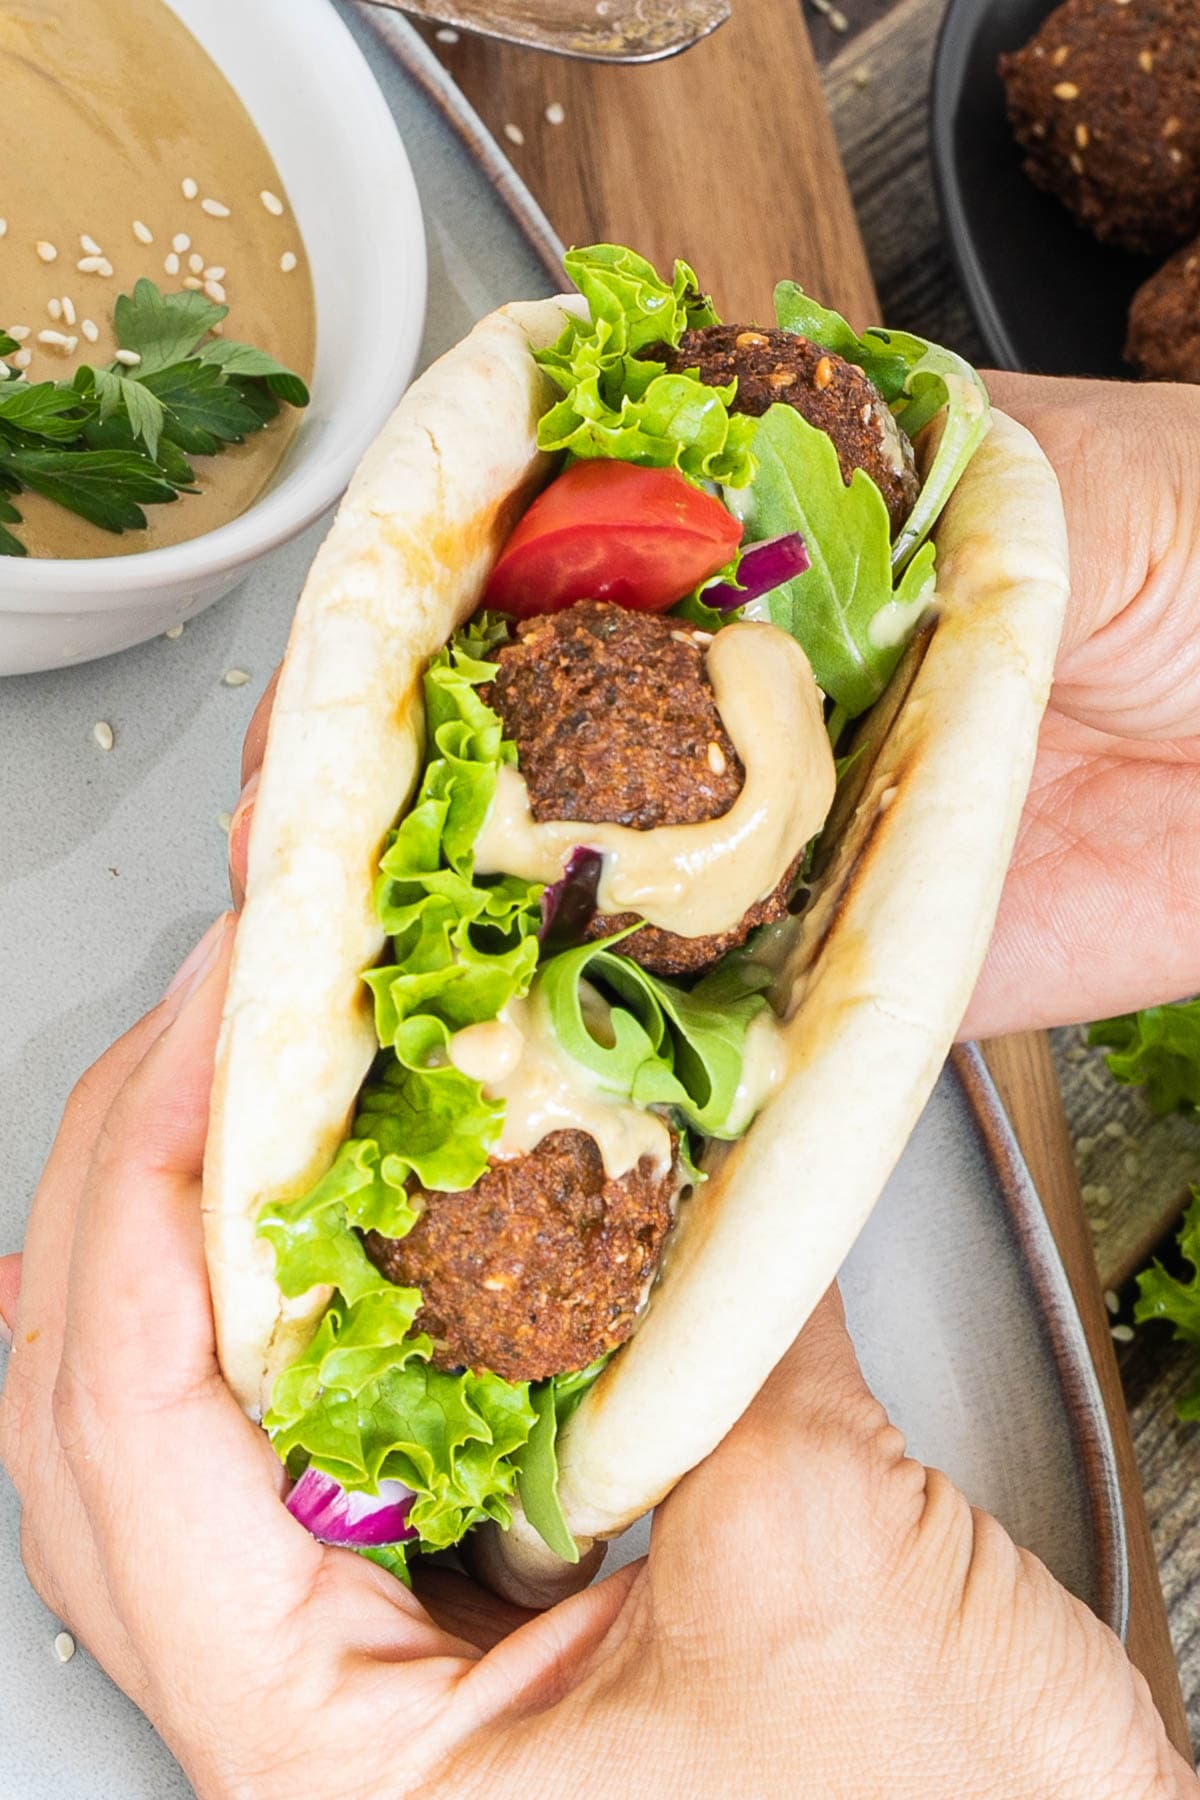 A hand is holding two pita breads as a sandwich filled with dark brown falafel bowls, vibrant green ruffled lettuce and light brown thick sauce.